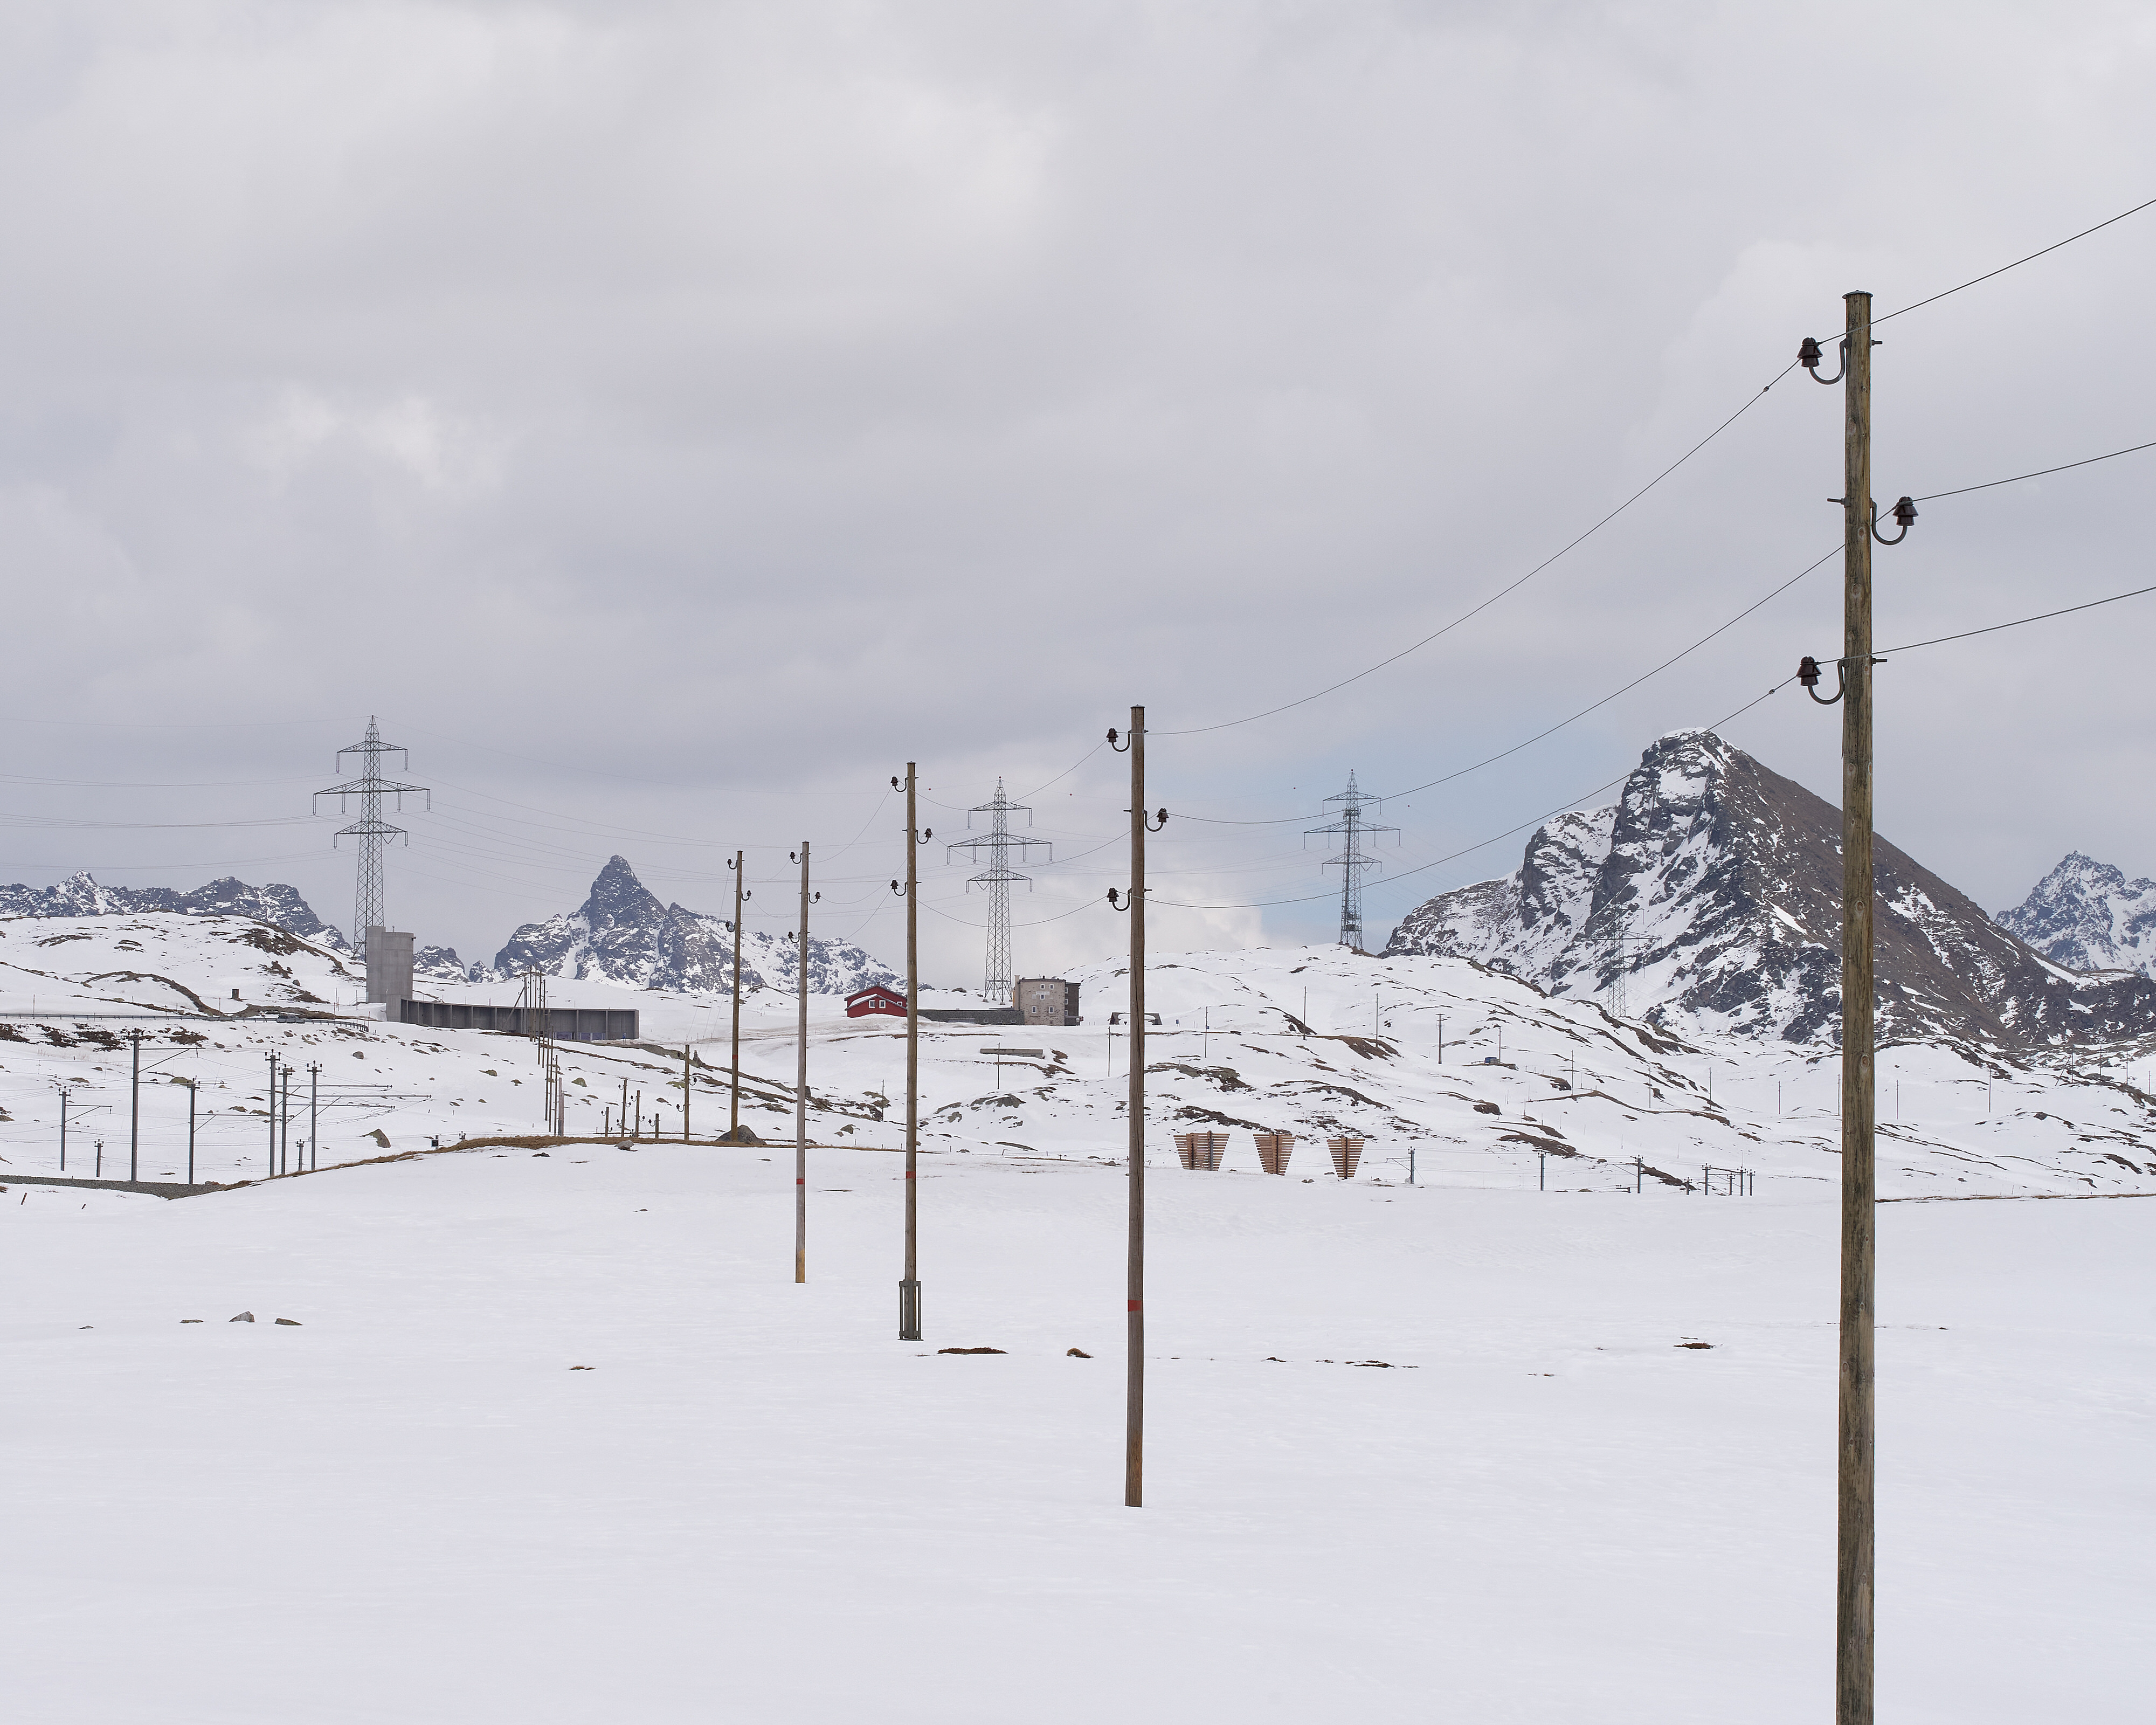 Scenic view of a snow-covered field featuring power lines and poles at a mountain pass against a backdrop of winter beauty.